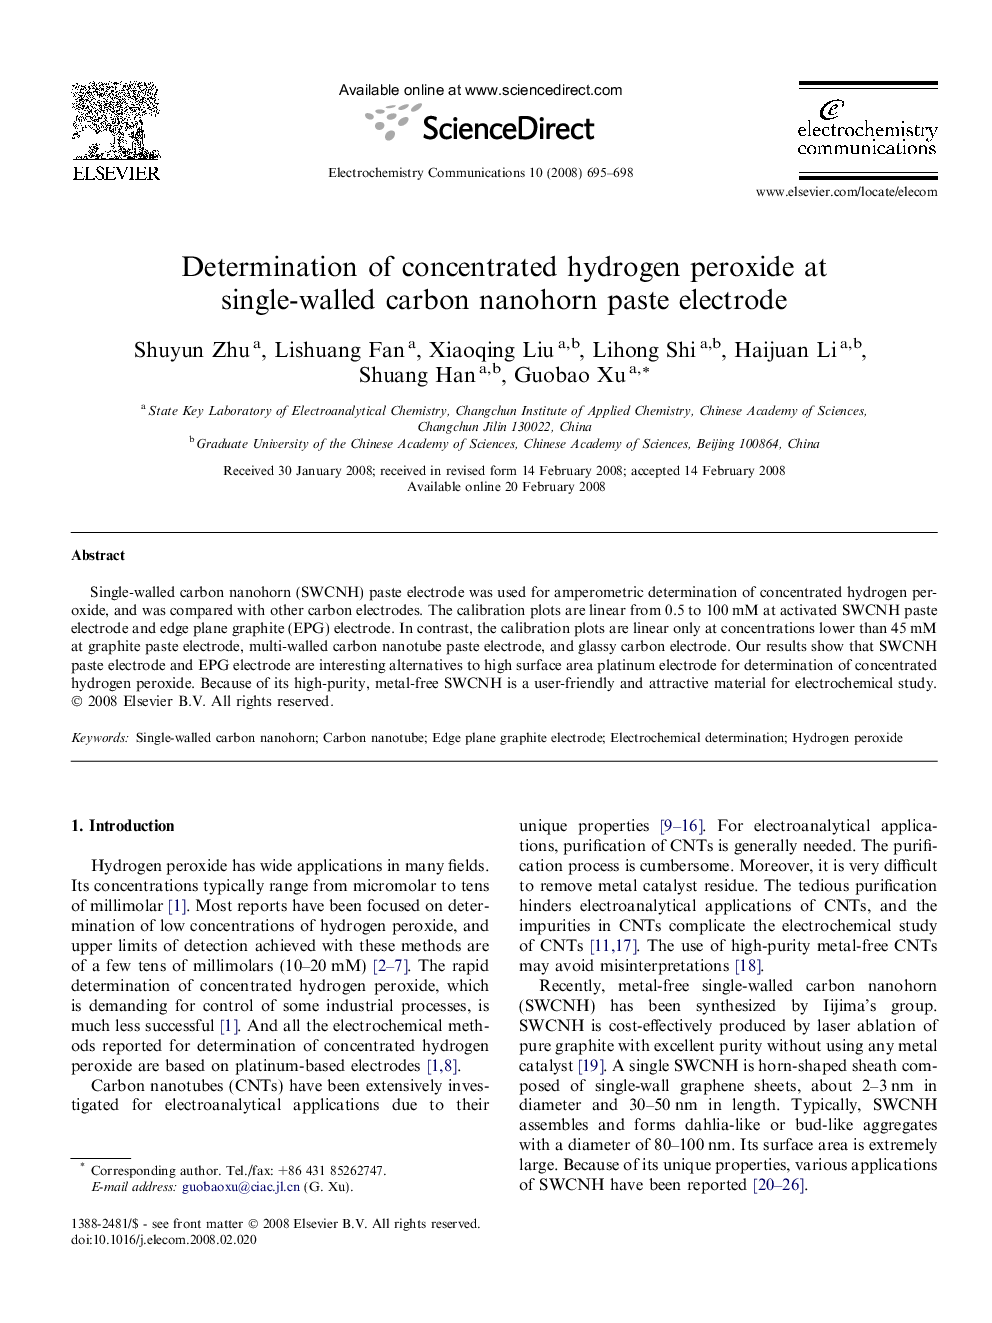 Determination of concentrated hydrogen peroxide at single-walled carbon nanohorn paste electrode